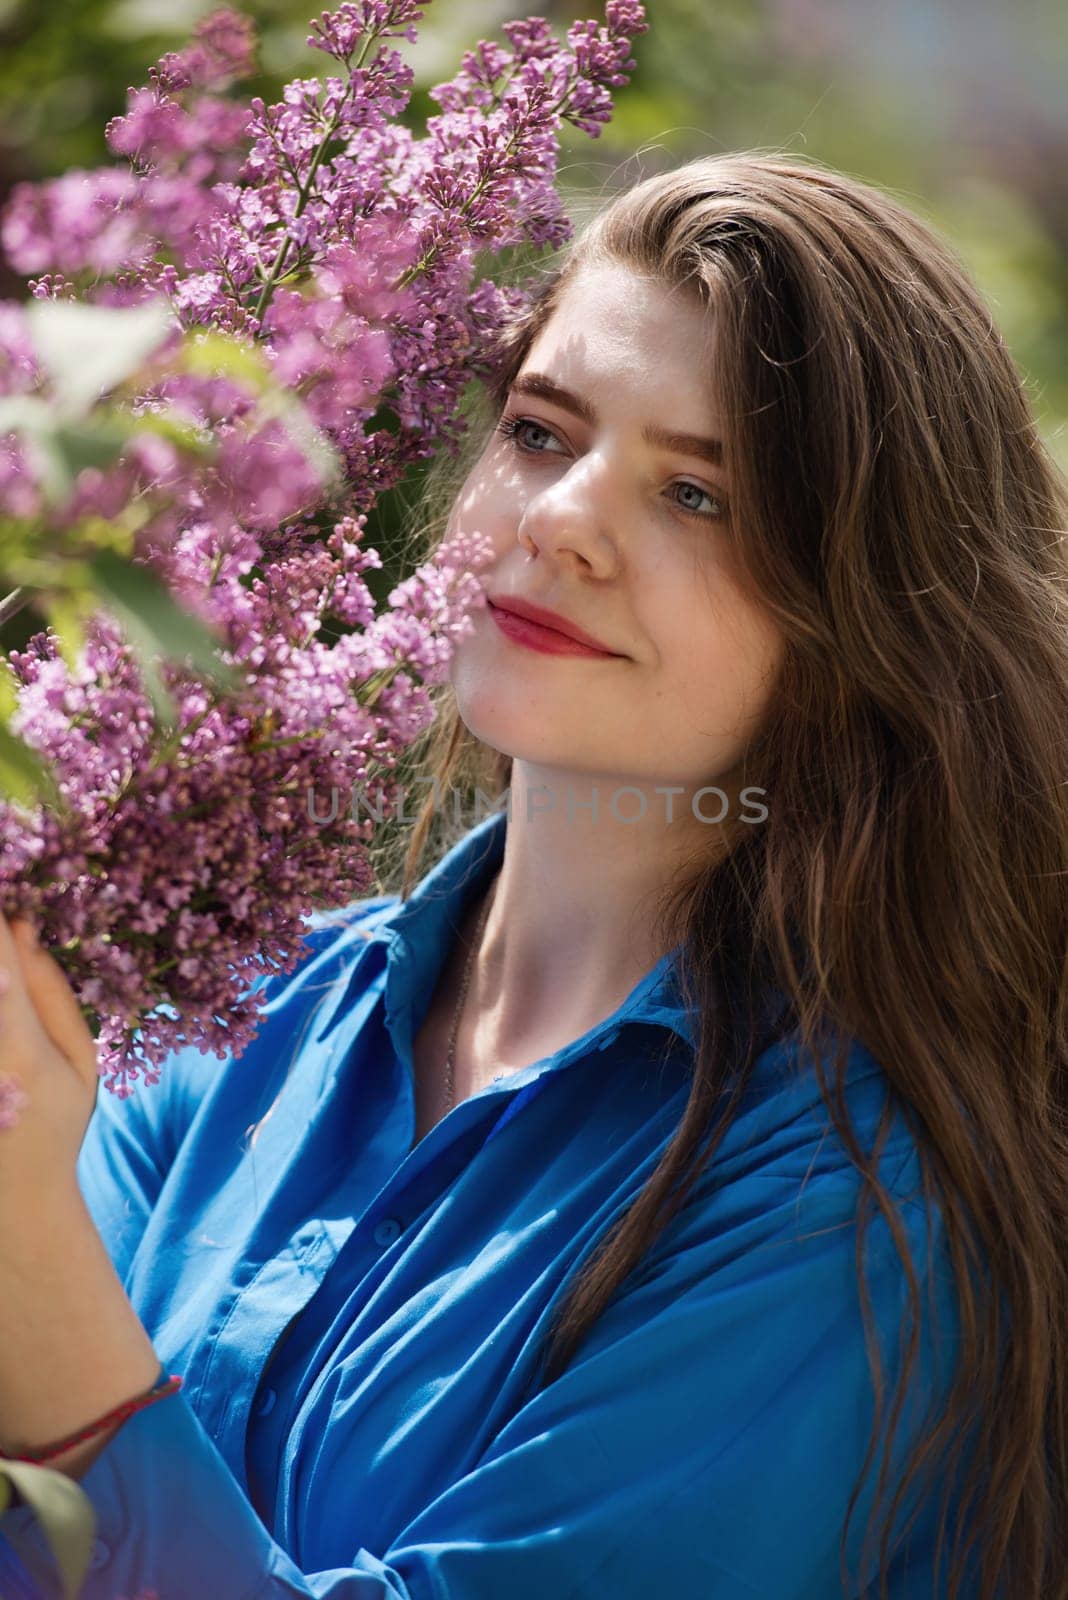 Portrait of a young woman in lilac flowers.